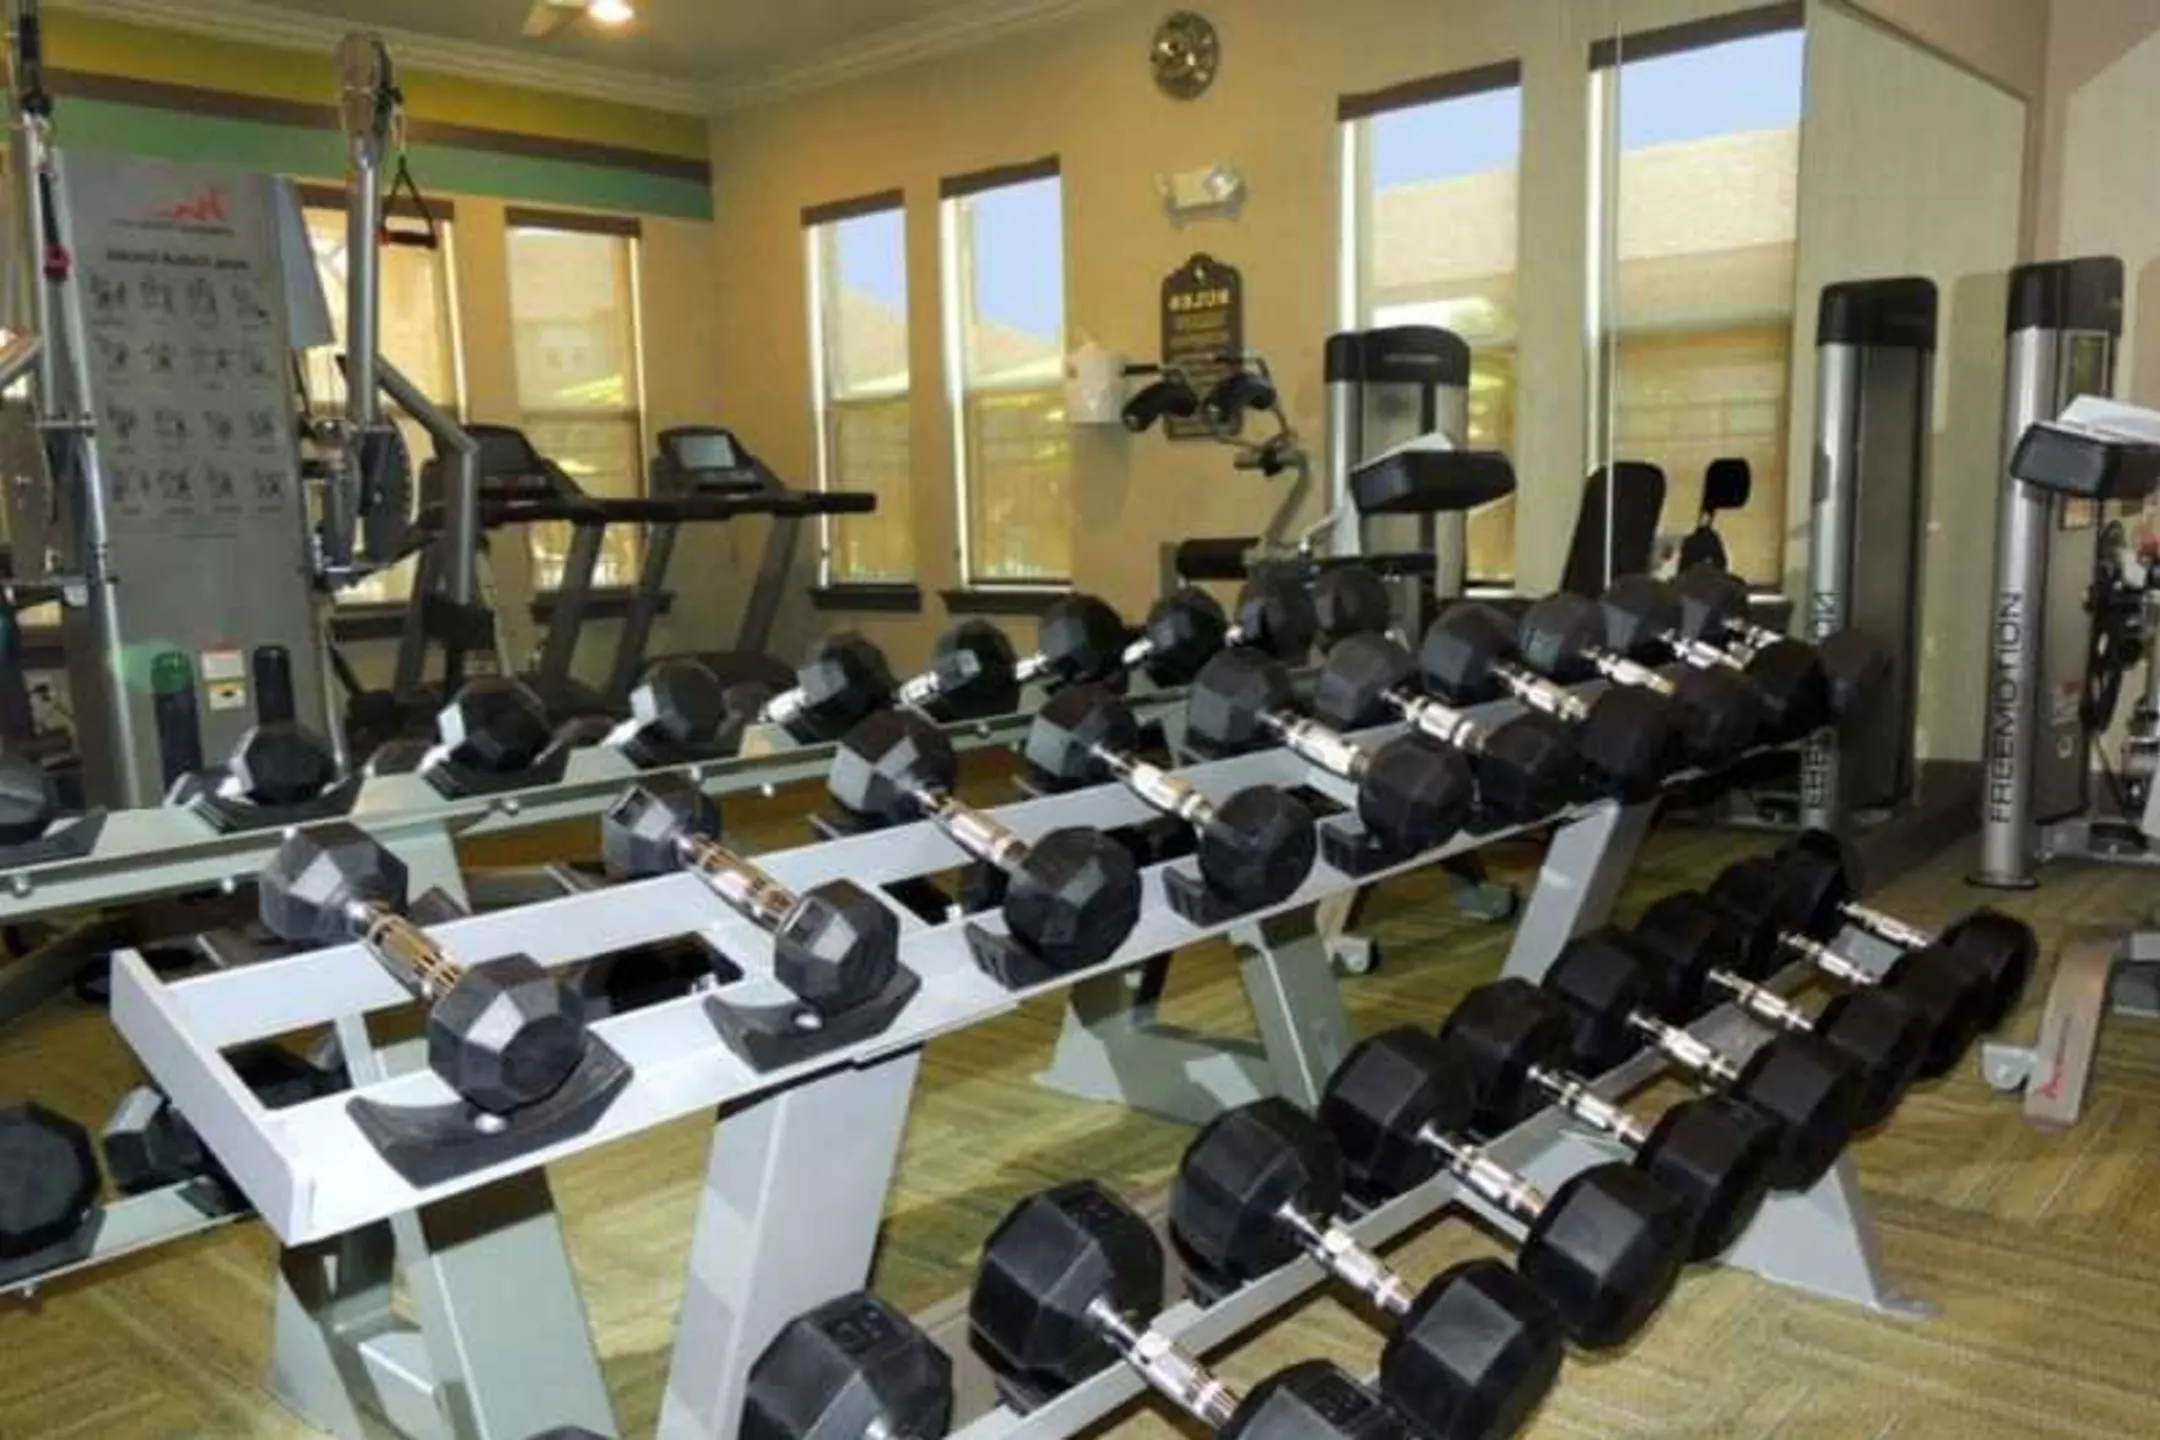 Fitness Weight Room - Le Rivage - Bossier City, LA